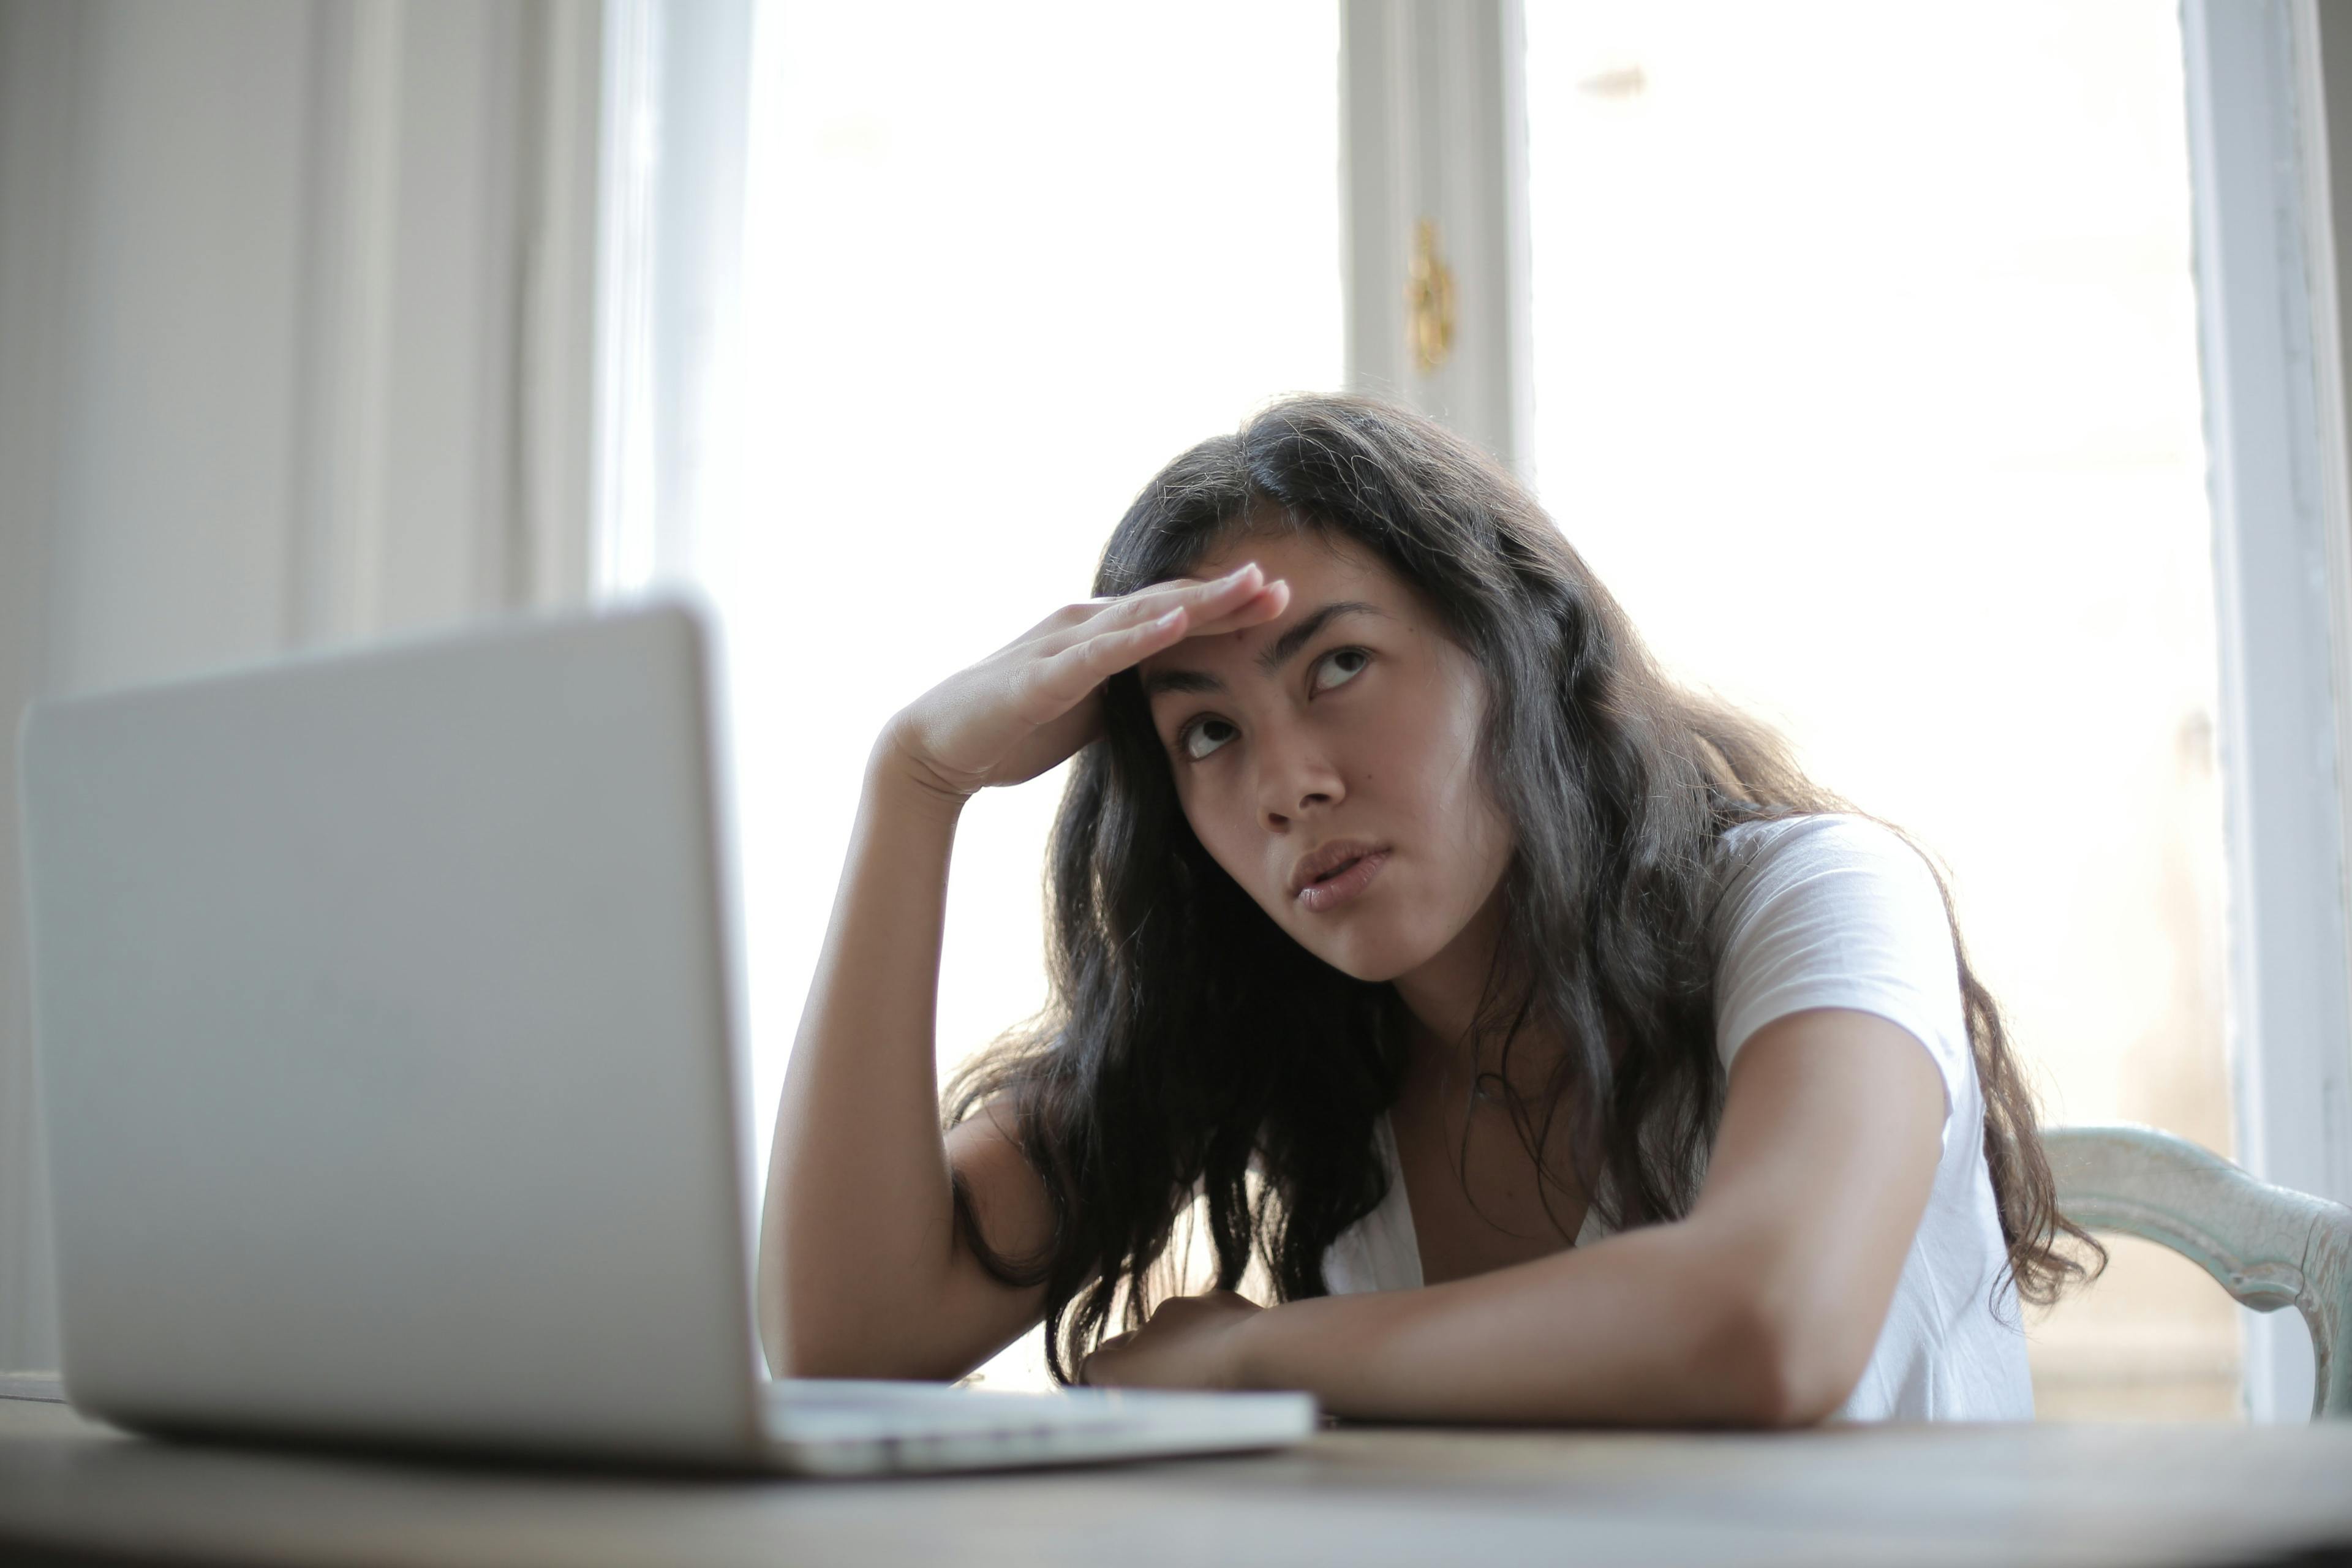 Young woman looking stressed at her laptop screen.